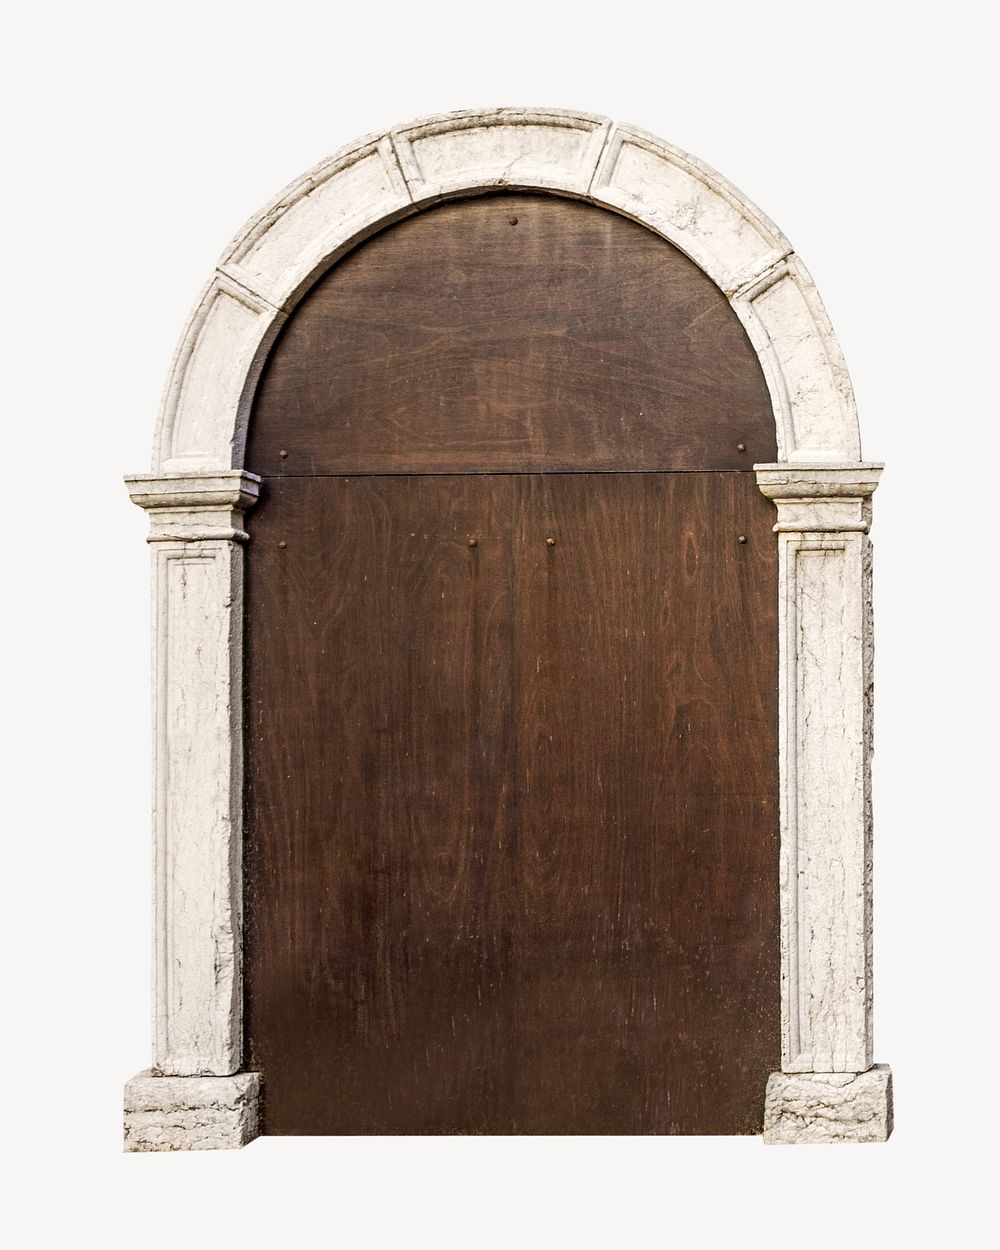 Historical arch door, isolated object